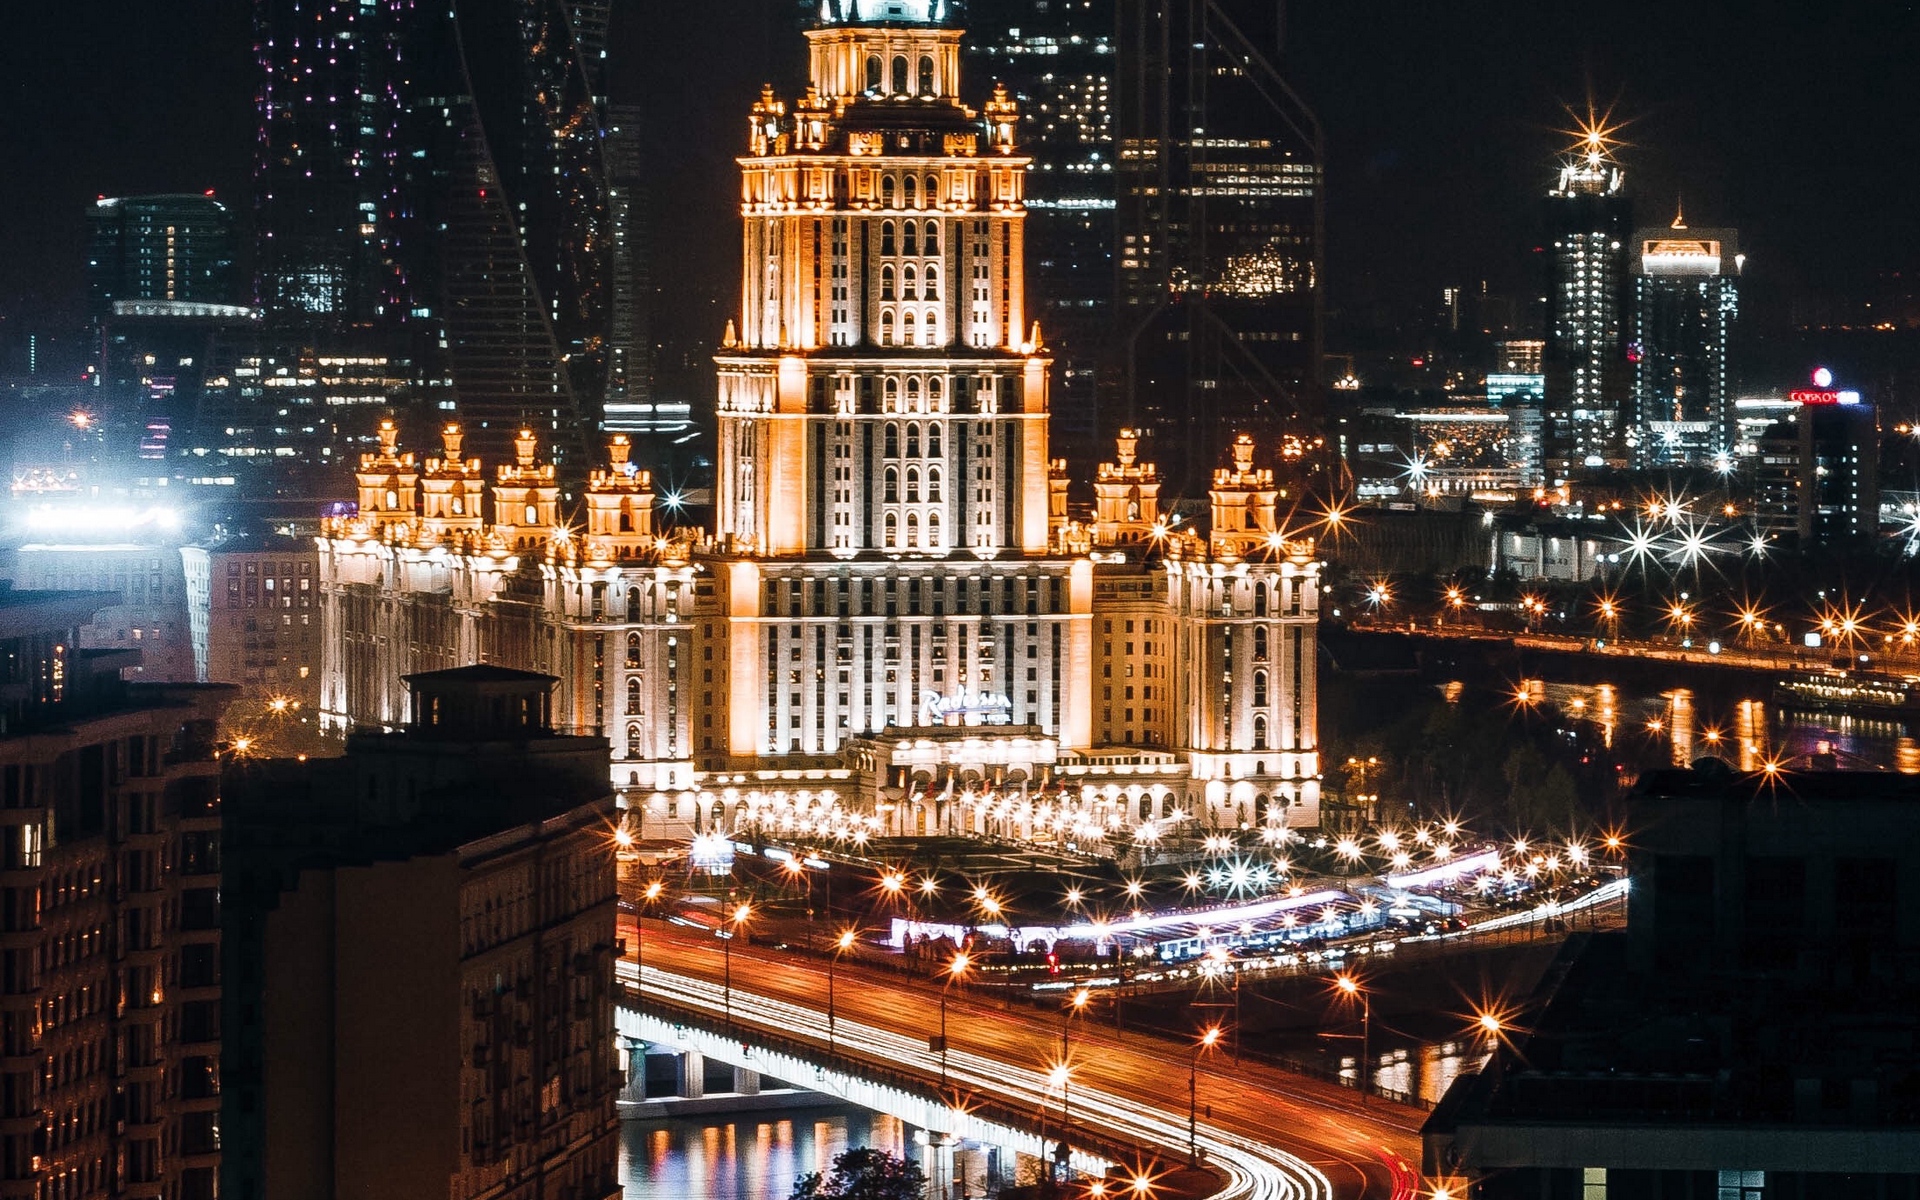 Download wallpaper 1920x1200 moscow, russia, night city